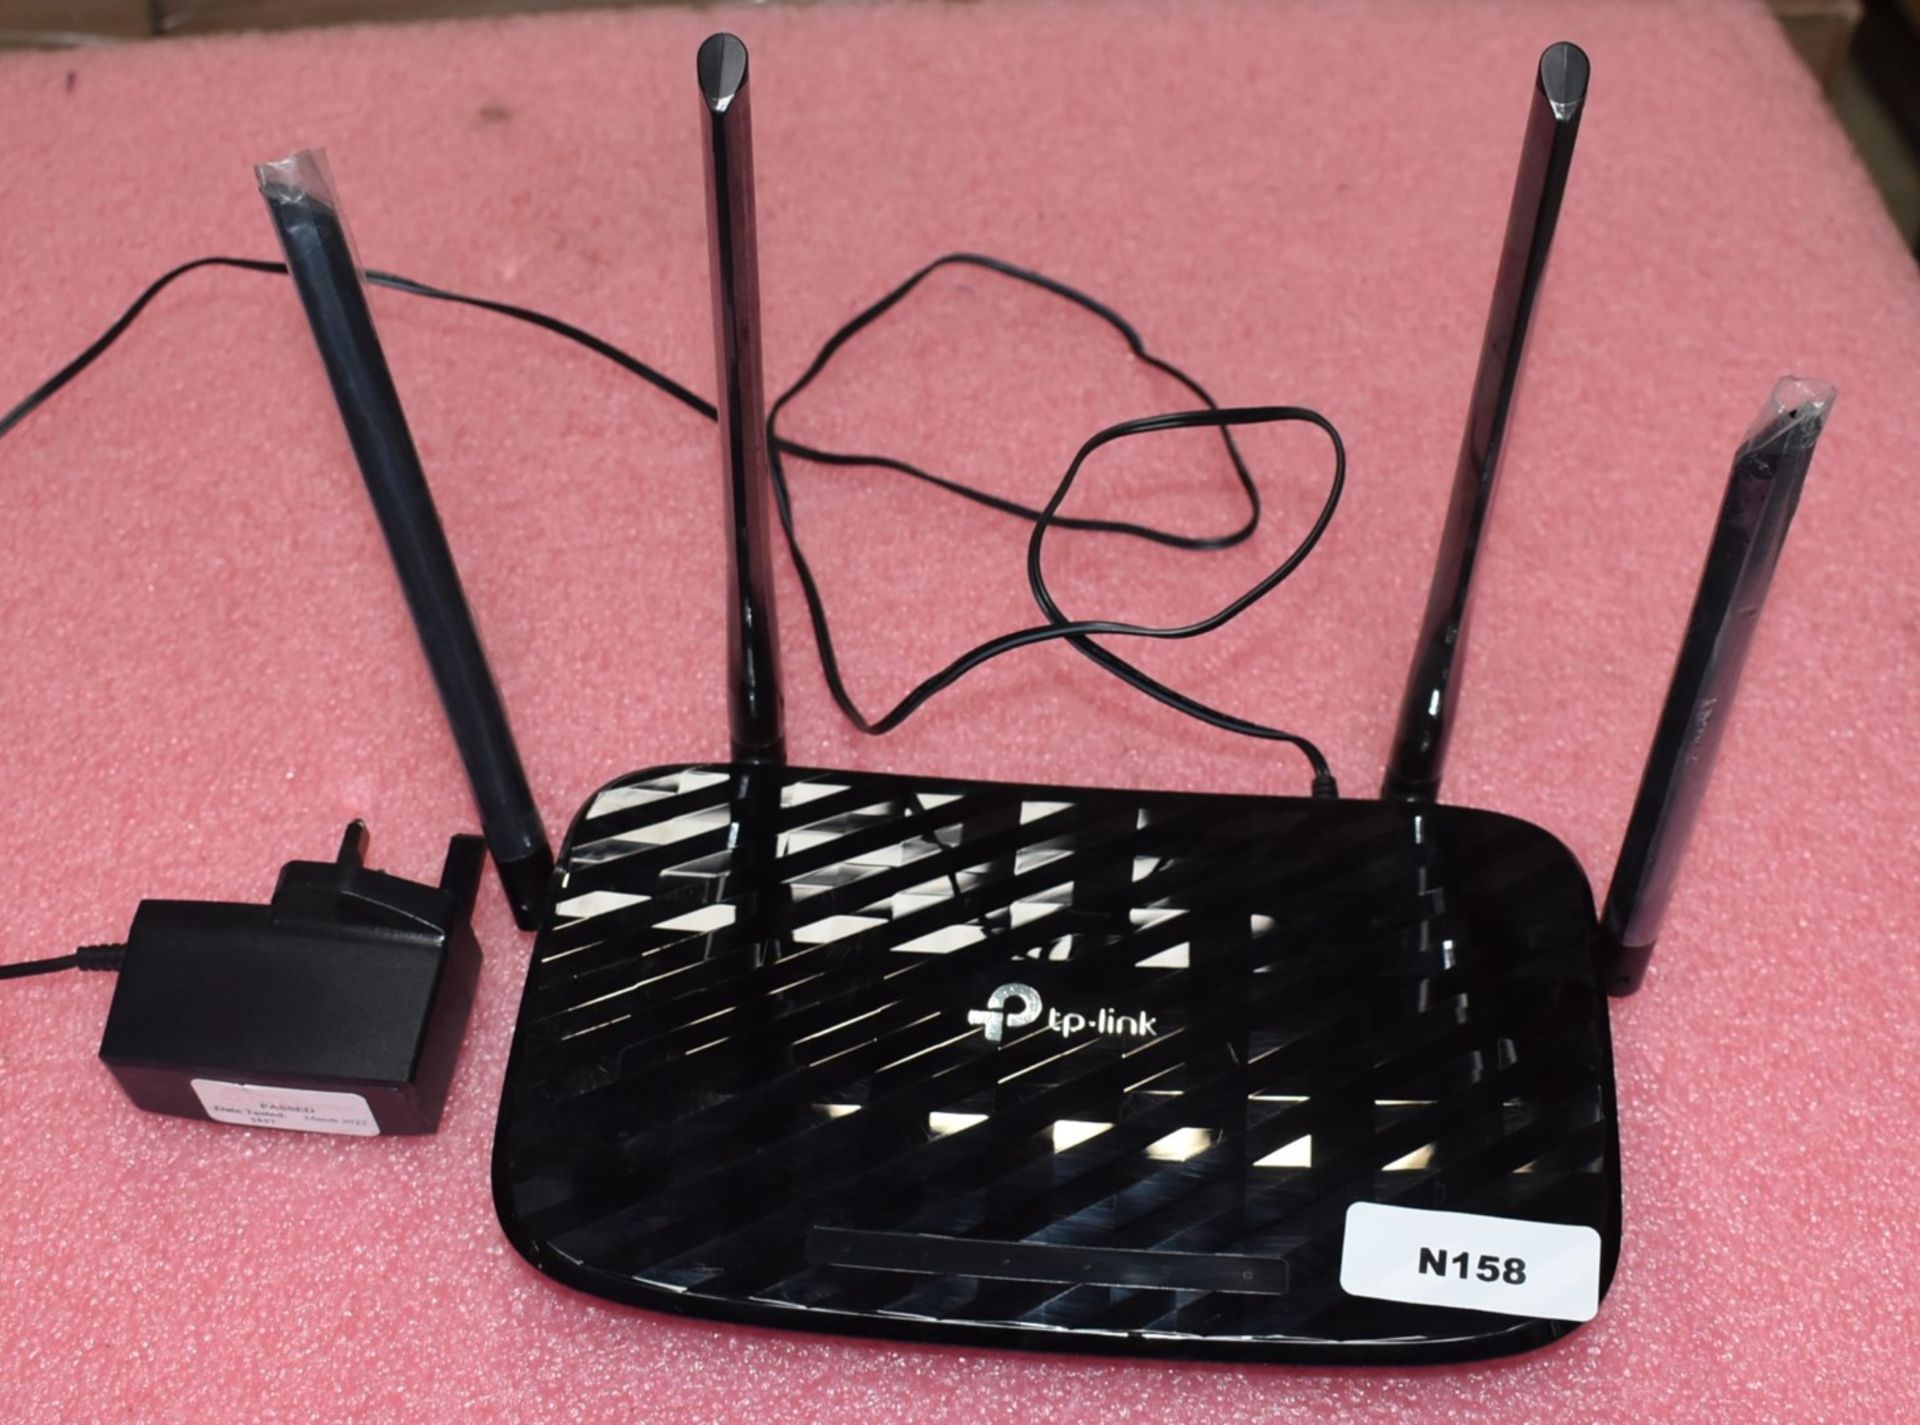 1 x TP Link AC1200 Wireless MU-MIMO Gigabit Router - Model Acher C6 - Includes Power Adaptor - Image 3 of 3